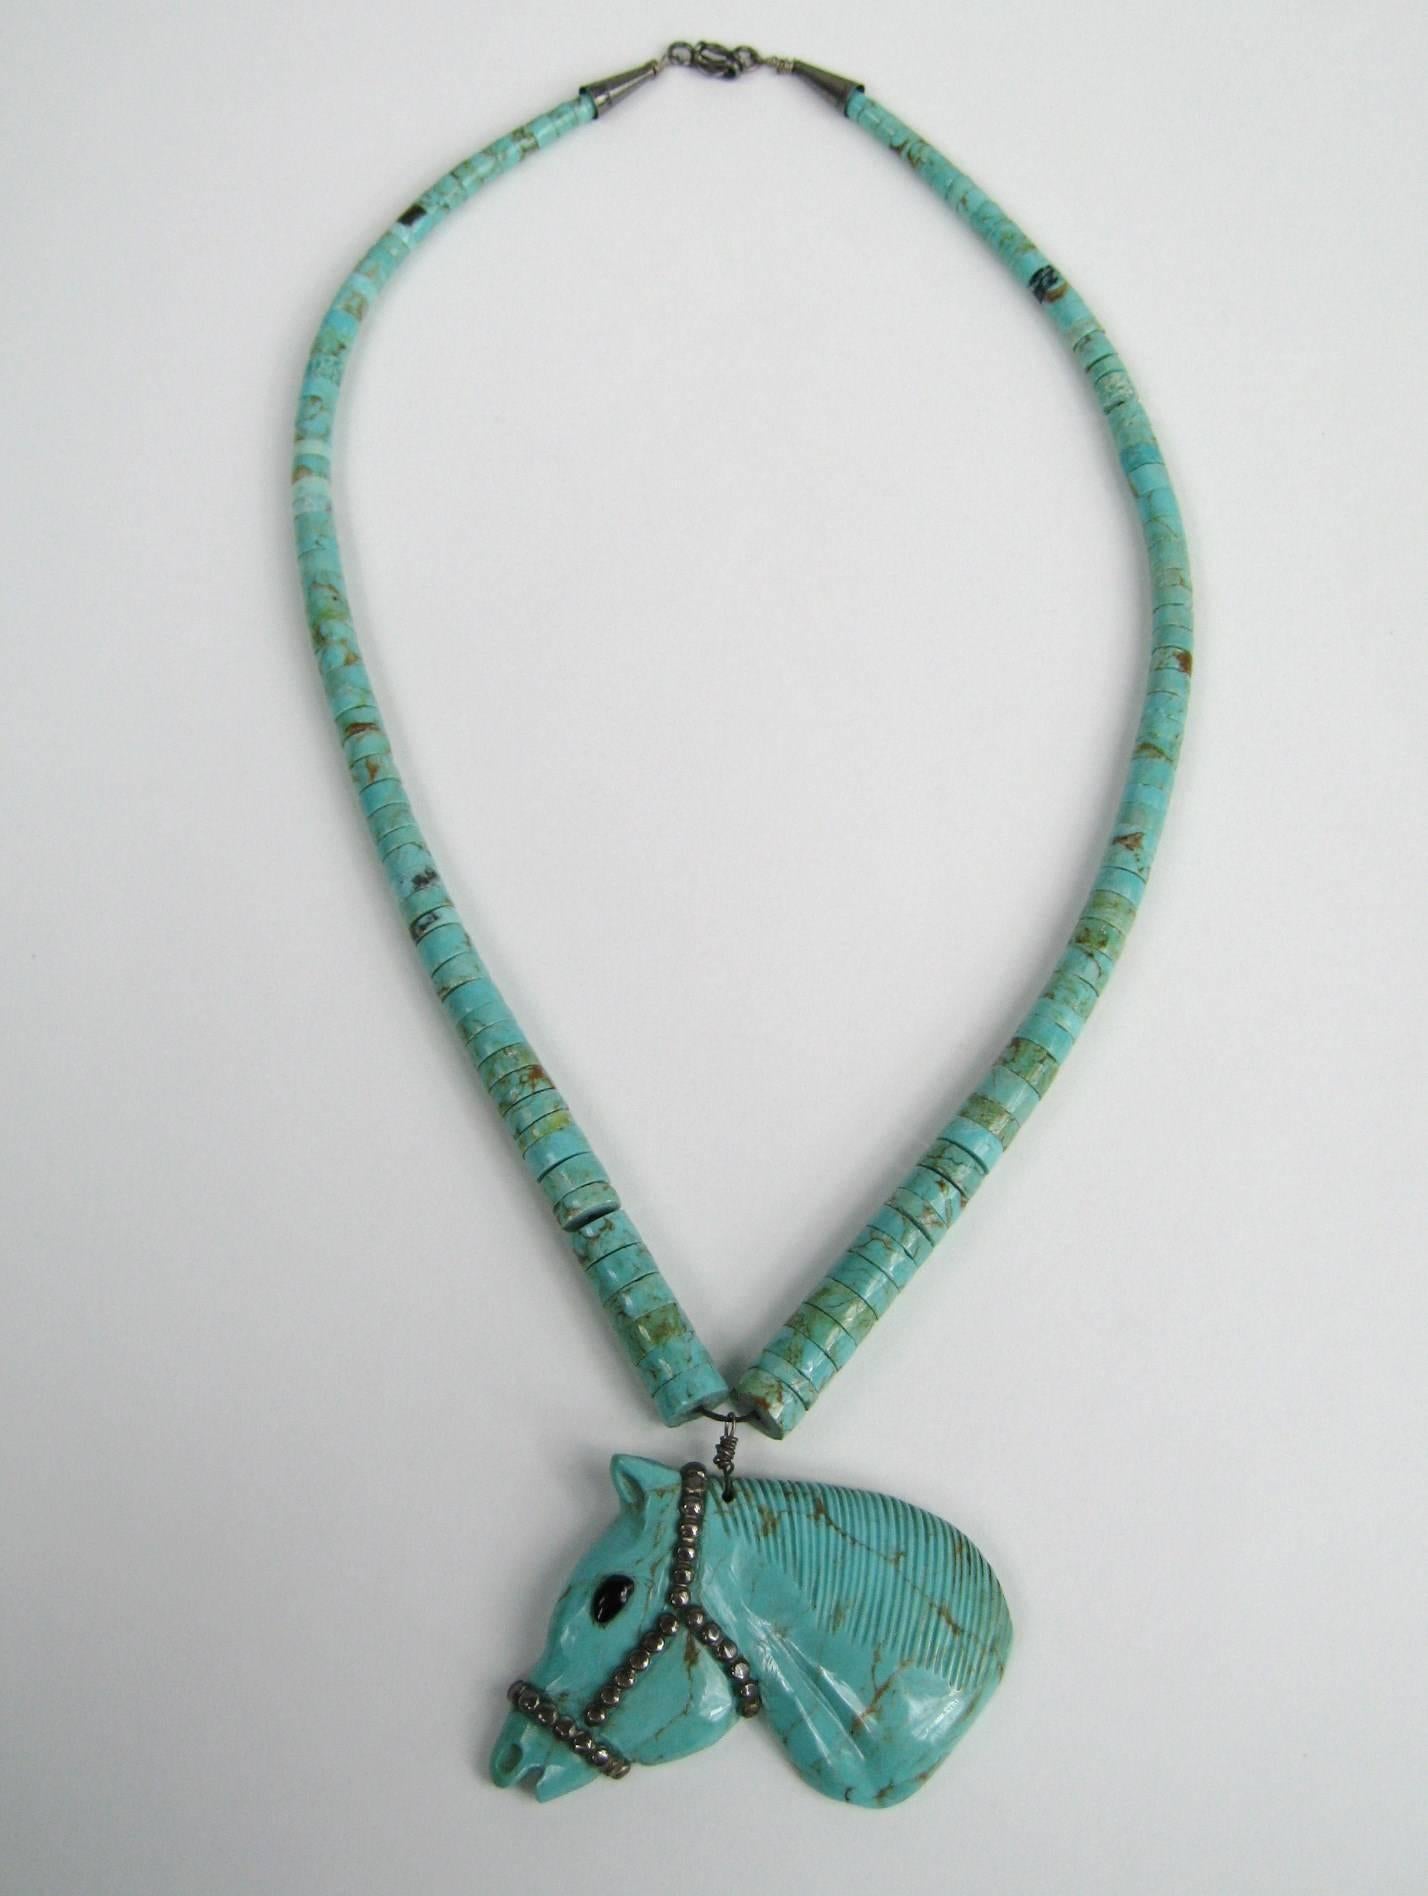 Truly a work of art Carved Turquoise Horse head with an onyx eye- Bridle is made up of Sterling Silver Strung on Turquoise discs. Horse head measures 2.22 inch top to bottom x 2.50 at the widest. Largest disc is .37 x 17 inches graduating down to